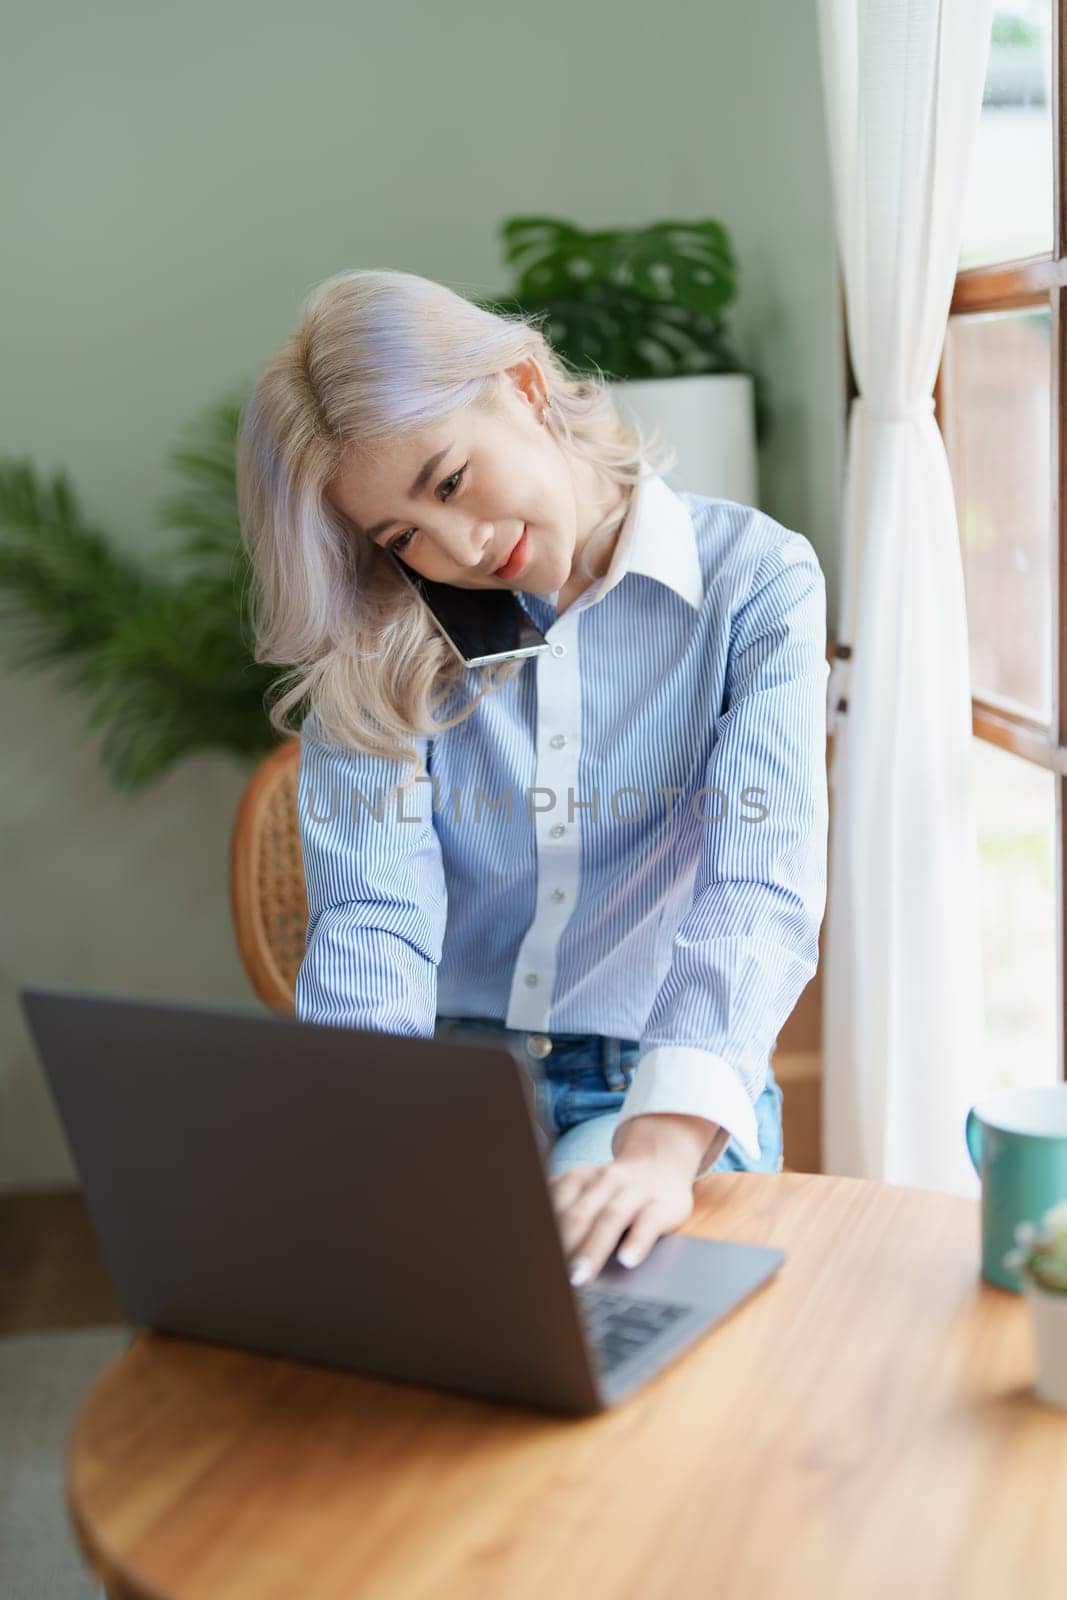 Portrait of a beautiful Asian teenage girl using her phone and computer sitting on the sofa at home.